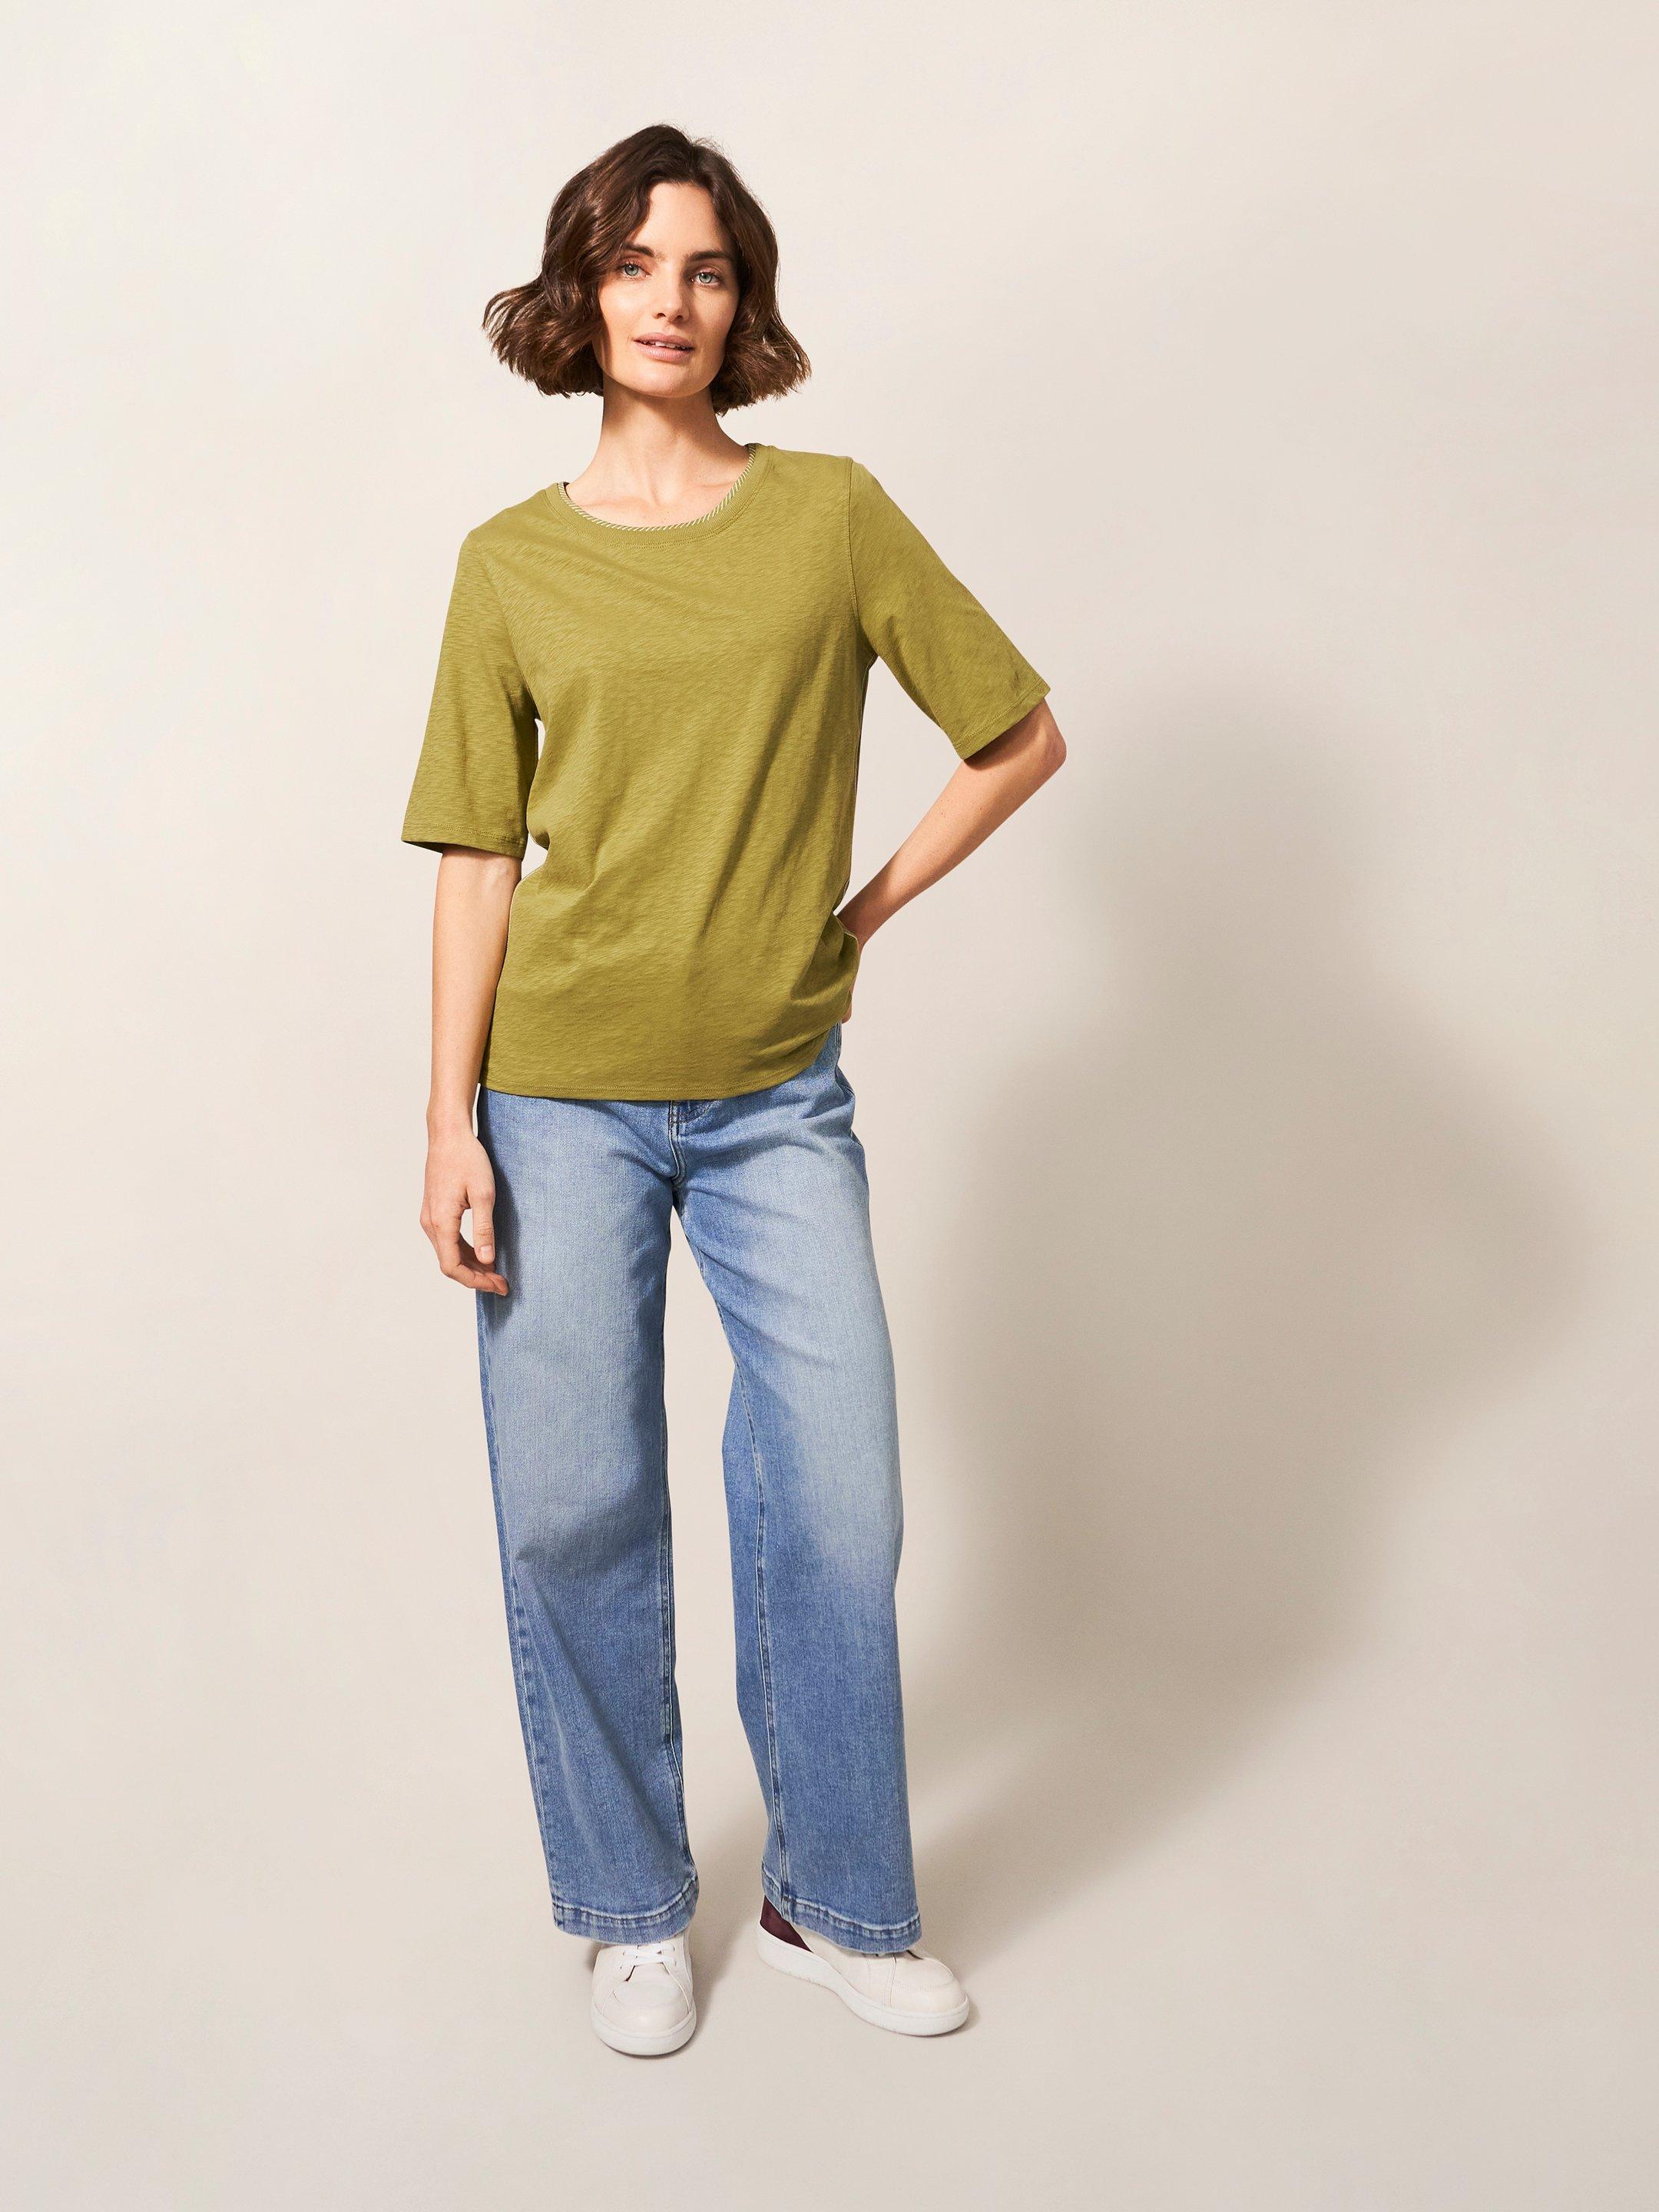 Annabel Fairtrade Cotton Tee in MID GREEN - MODEL FRONT